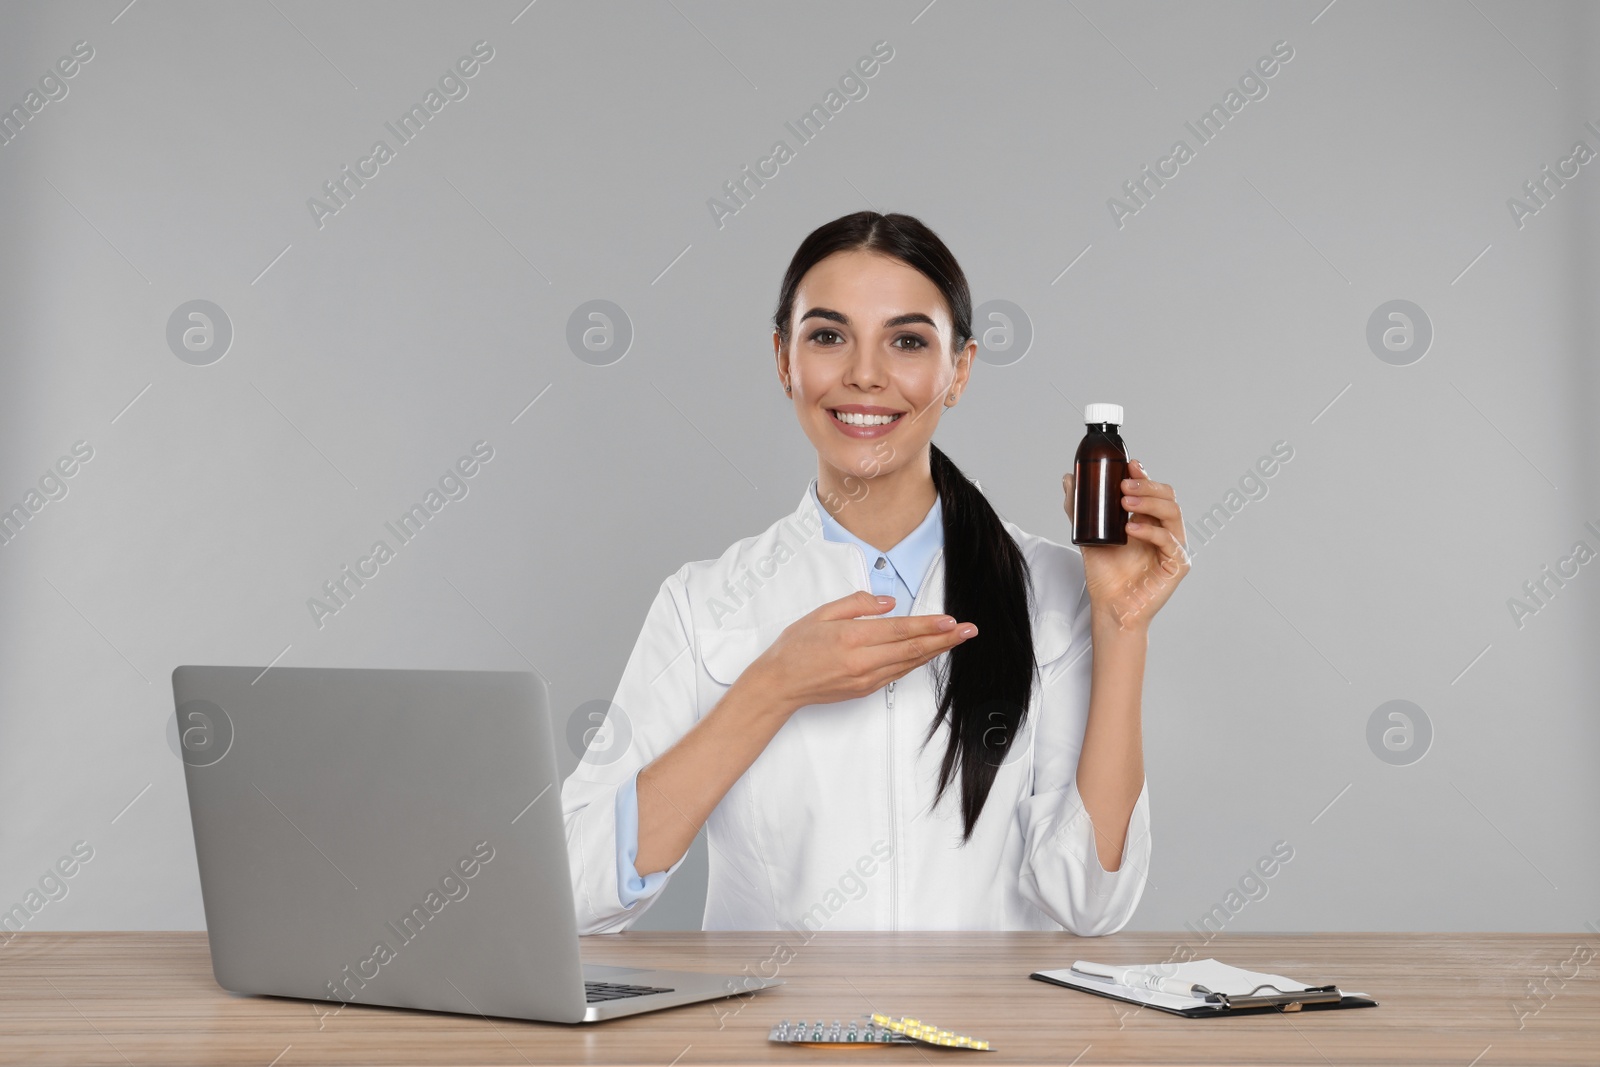 Photo of Professional pharmacist with syrup and laptop at table against light grey background